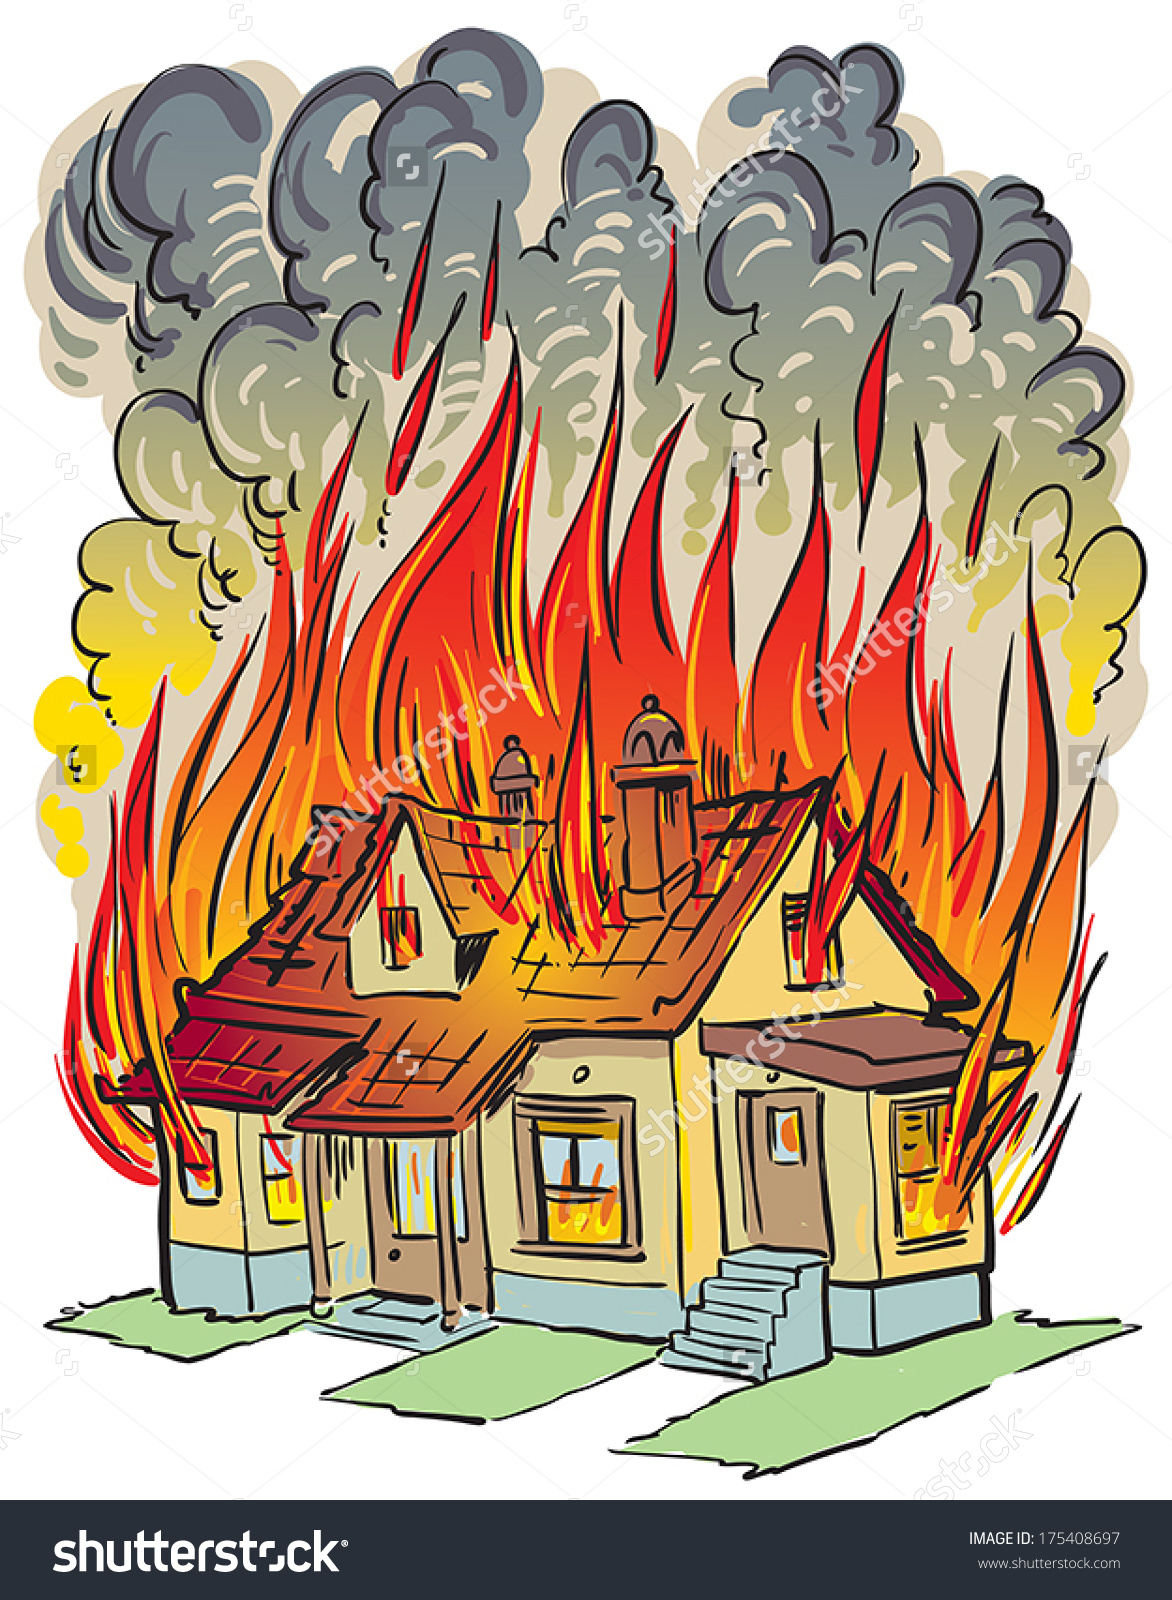 fire house clipart - photo #18